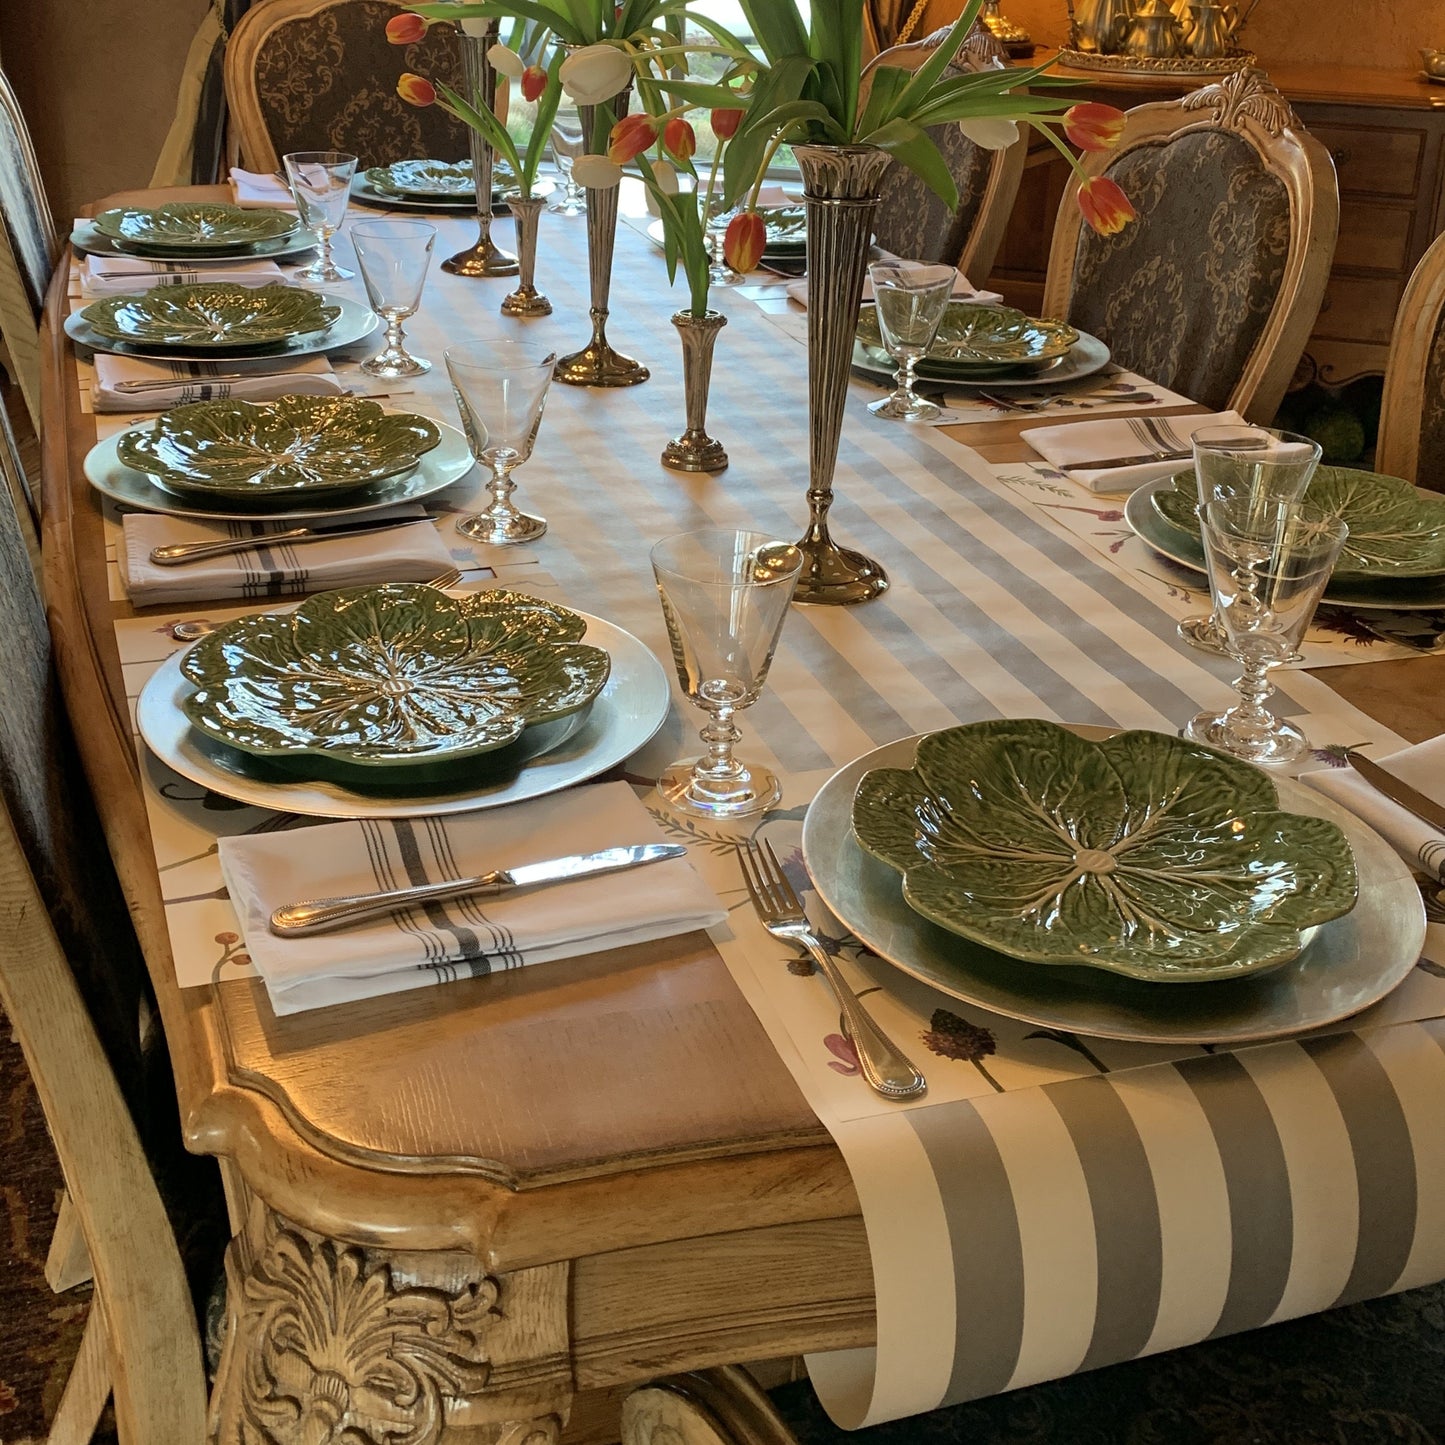 Showing  the Bistro Grey Striped Napkin in a more formal table setting.